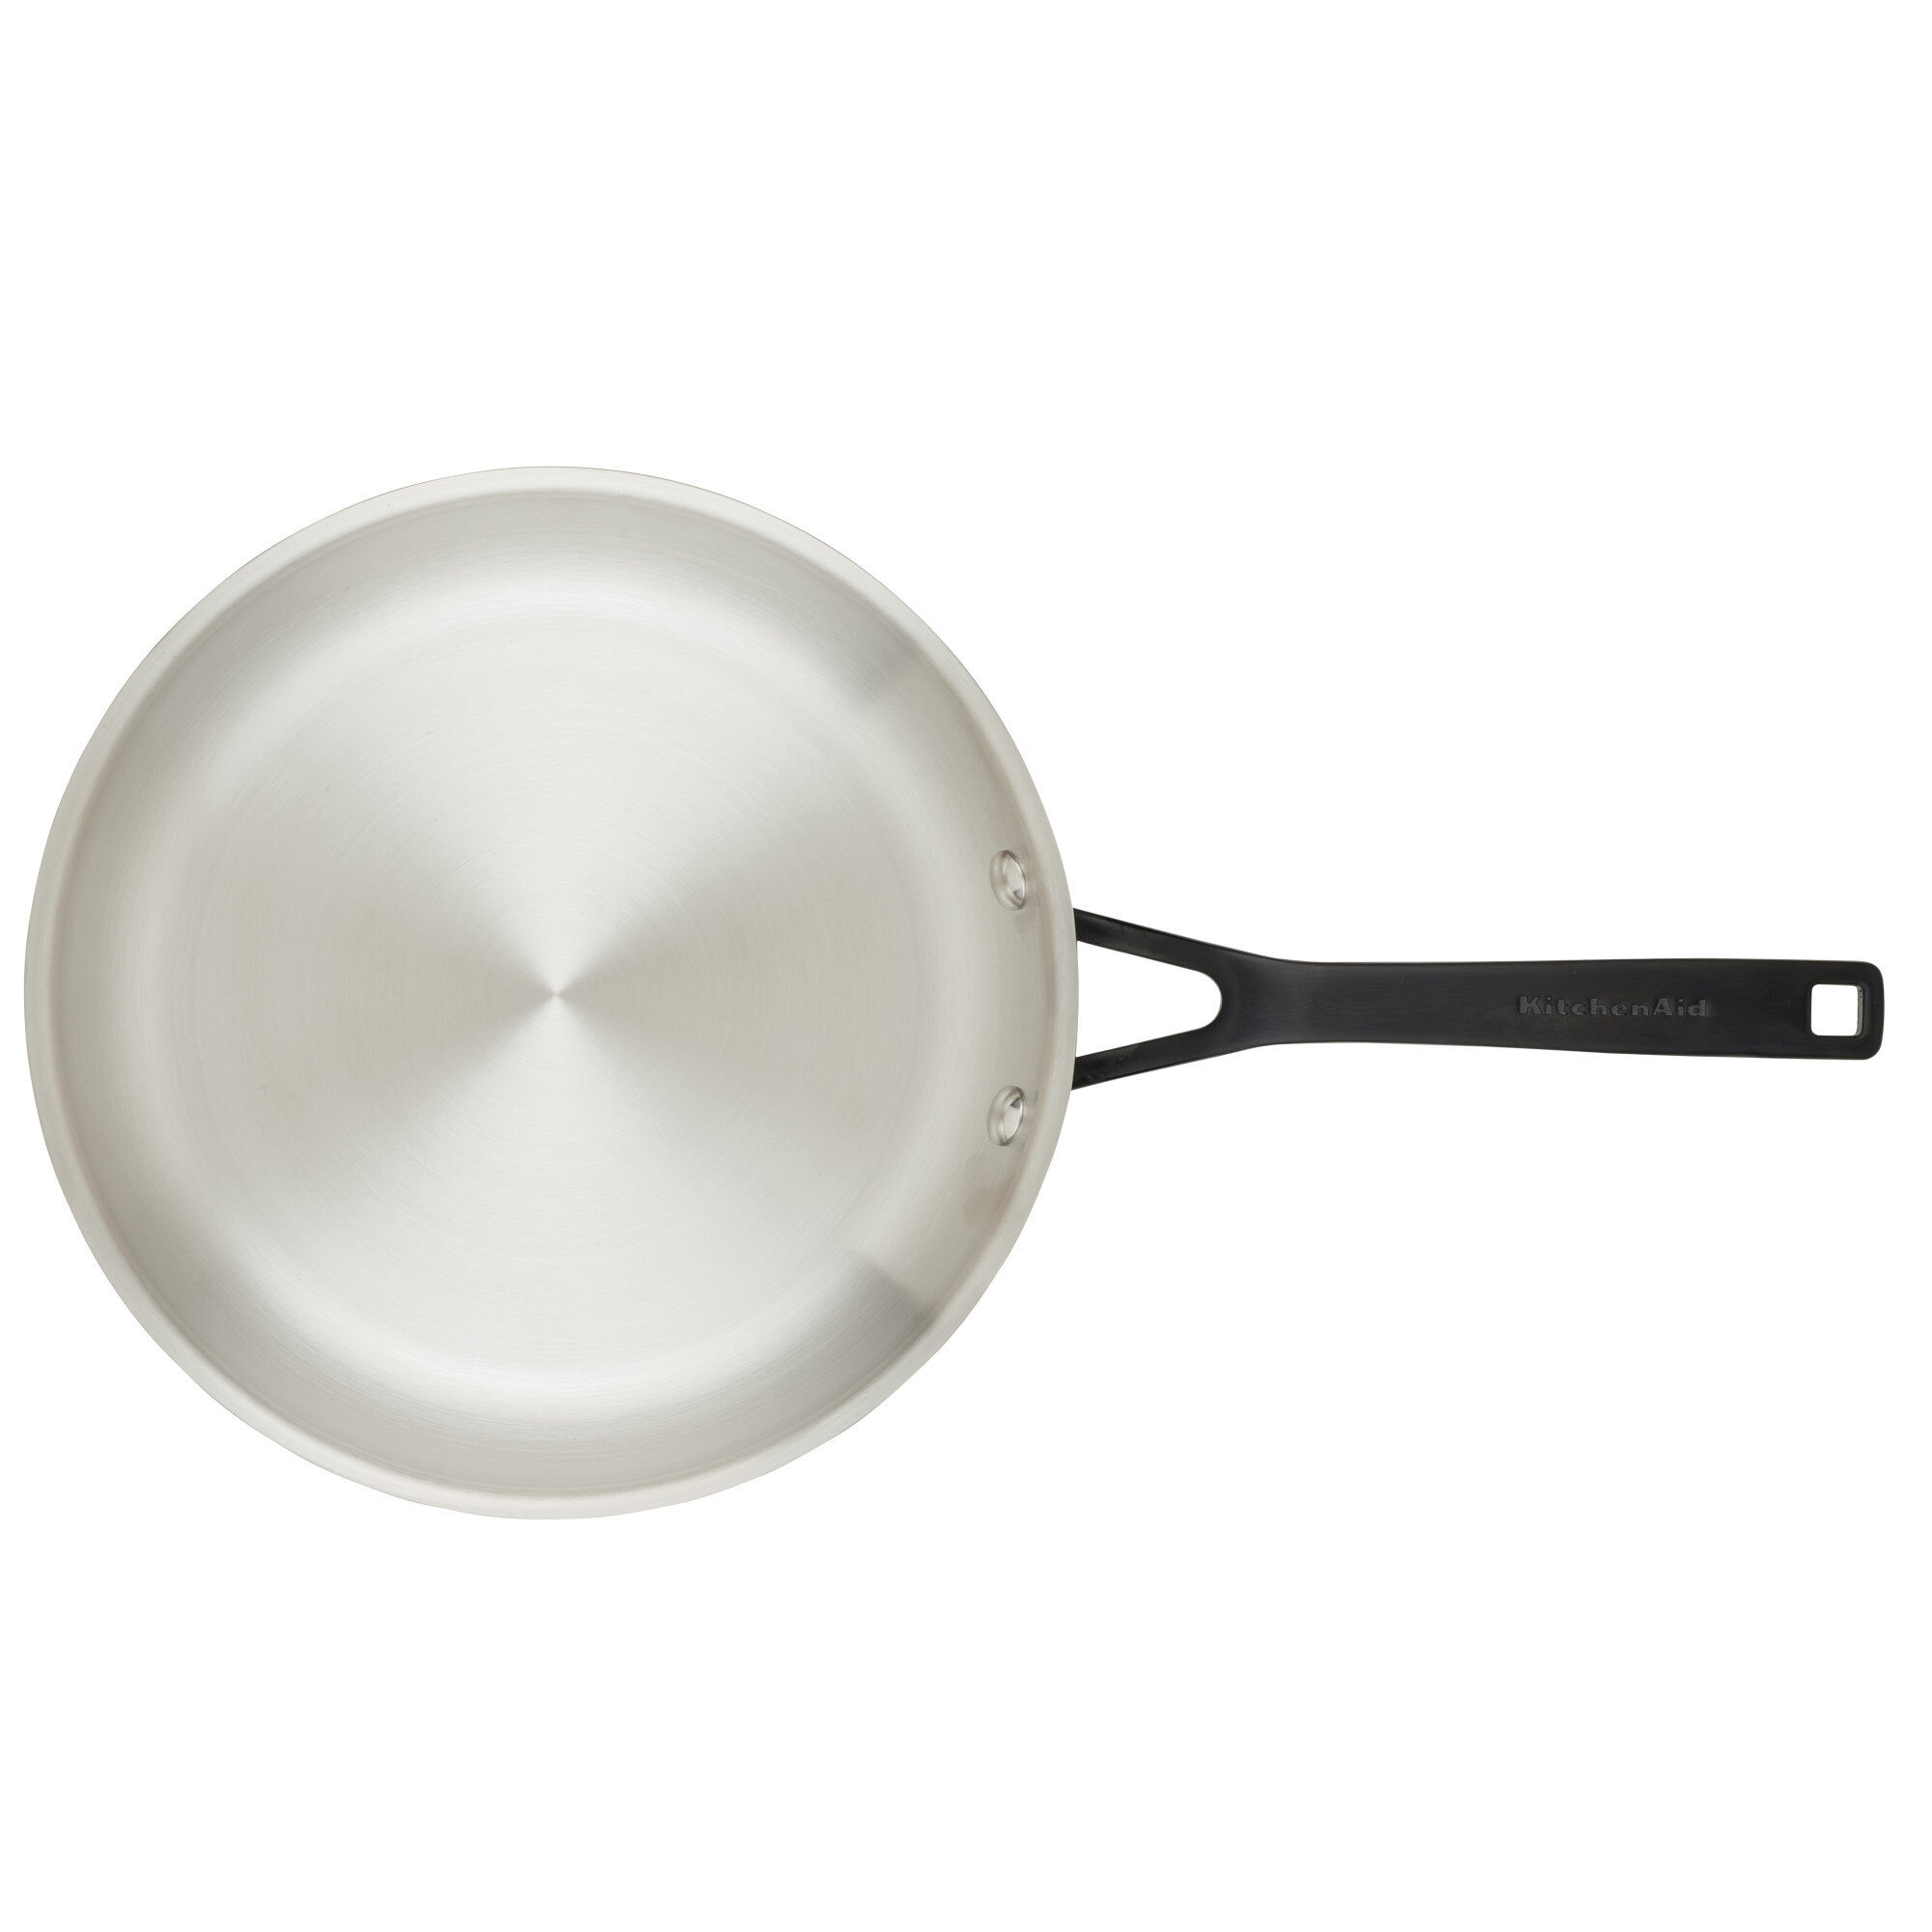 Electric Skillet By Cucina Pro - 18/10 Stainless Steel, Frying Pan